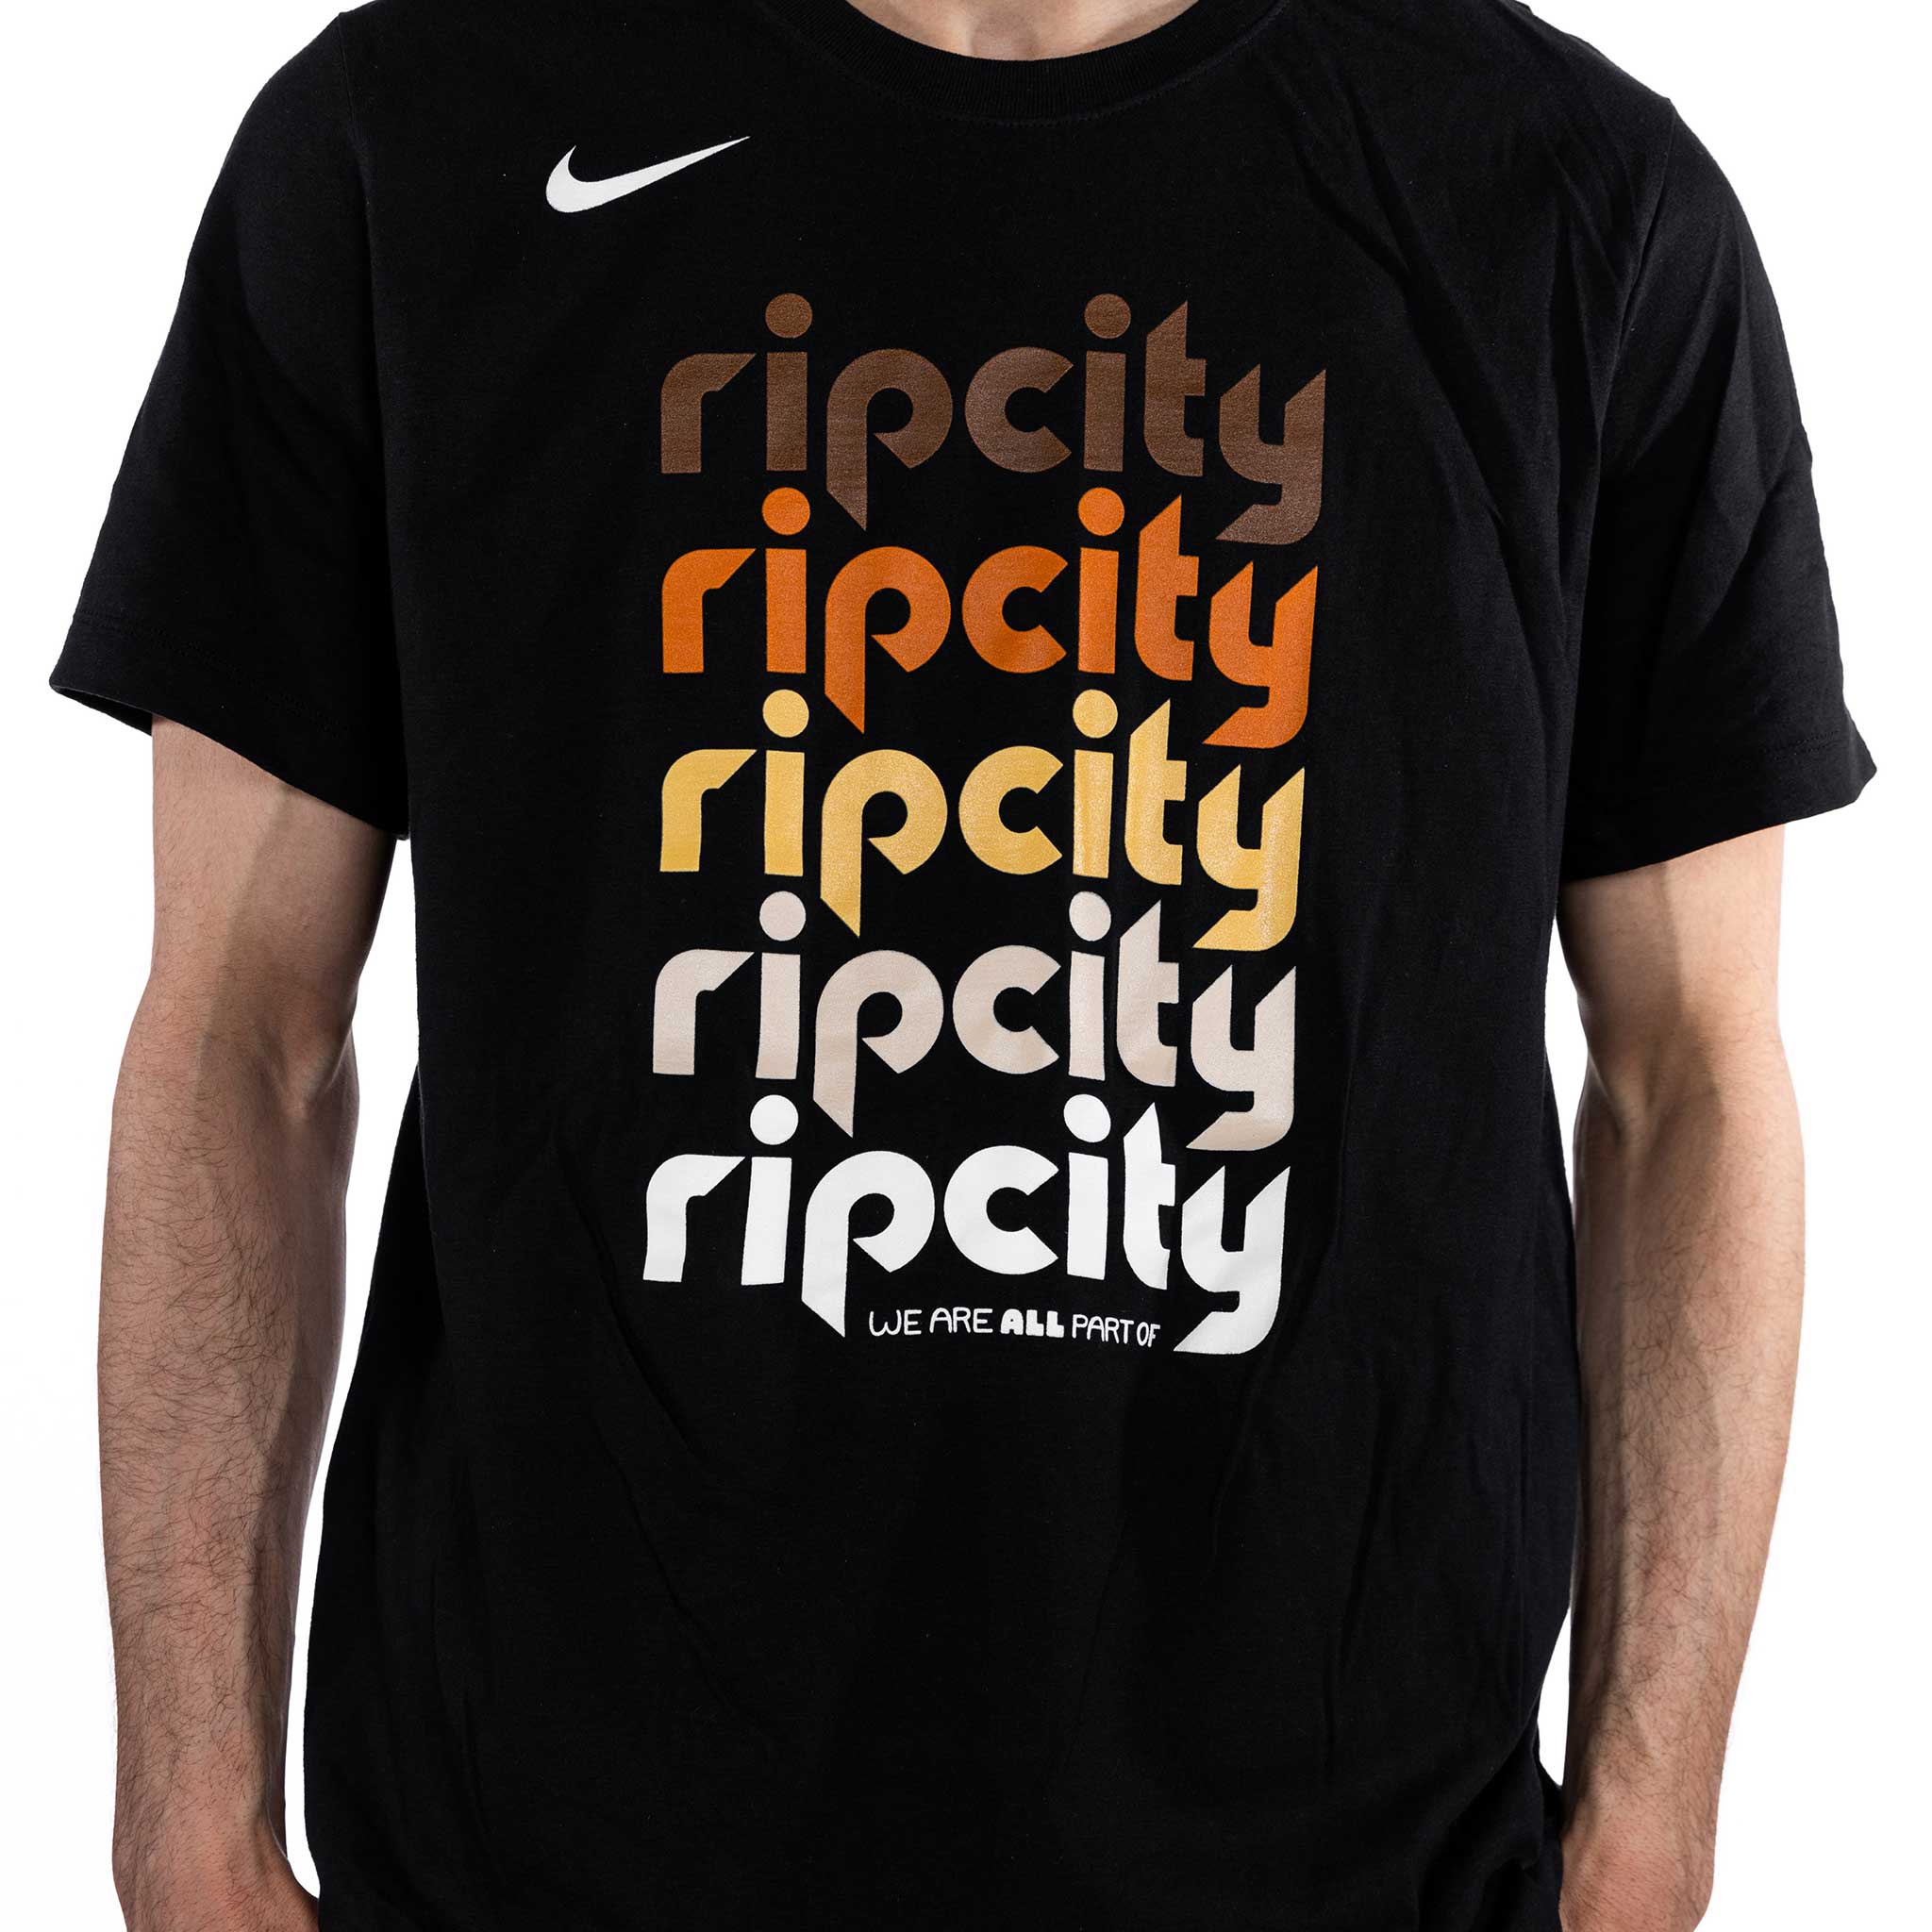 Rip City Clothing (@ripcityclothing) • Instagram photos and videos